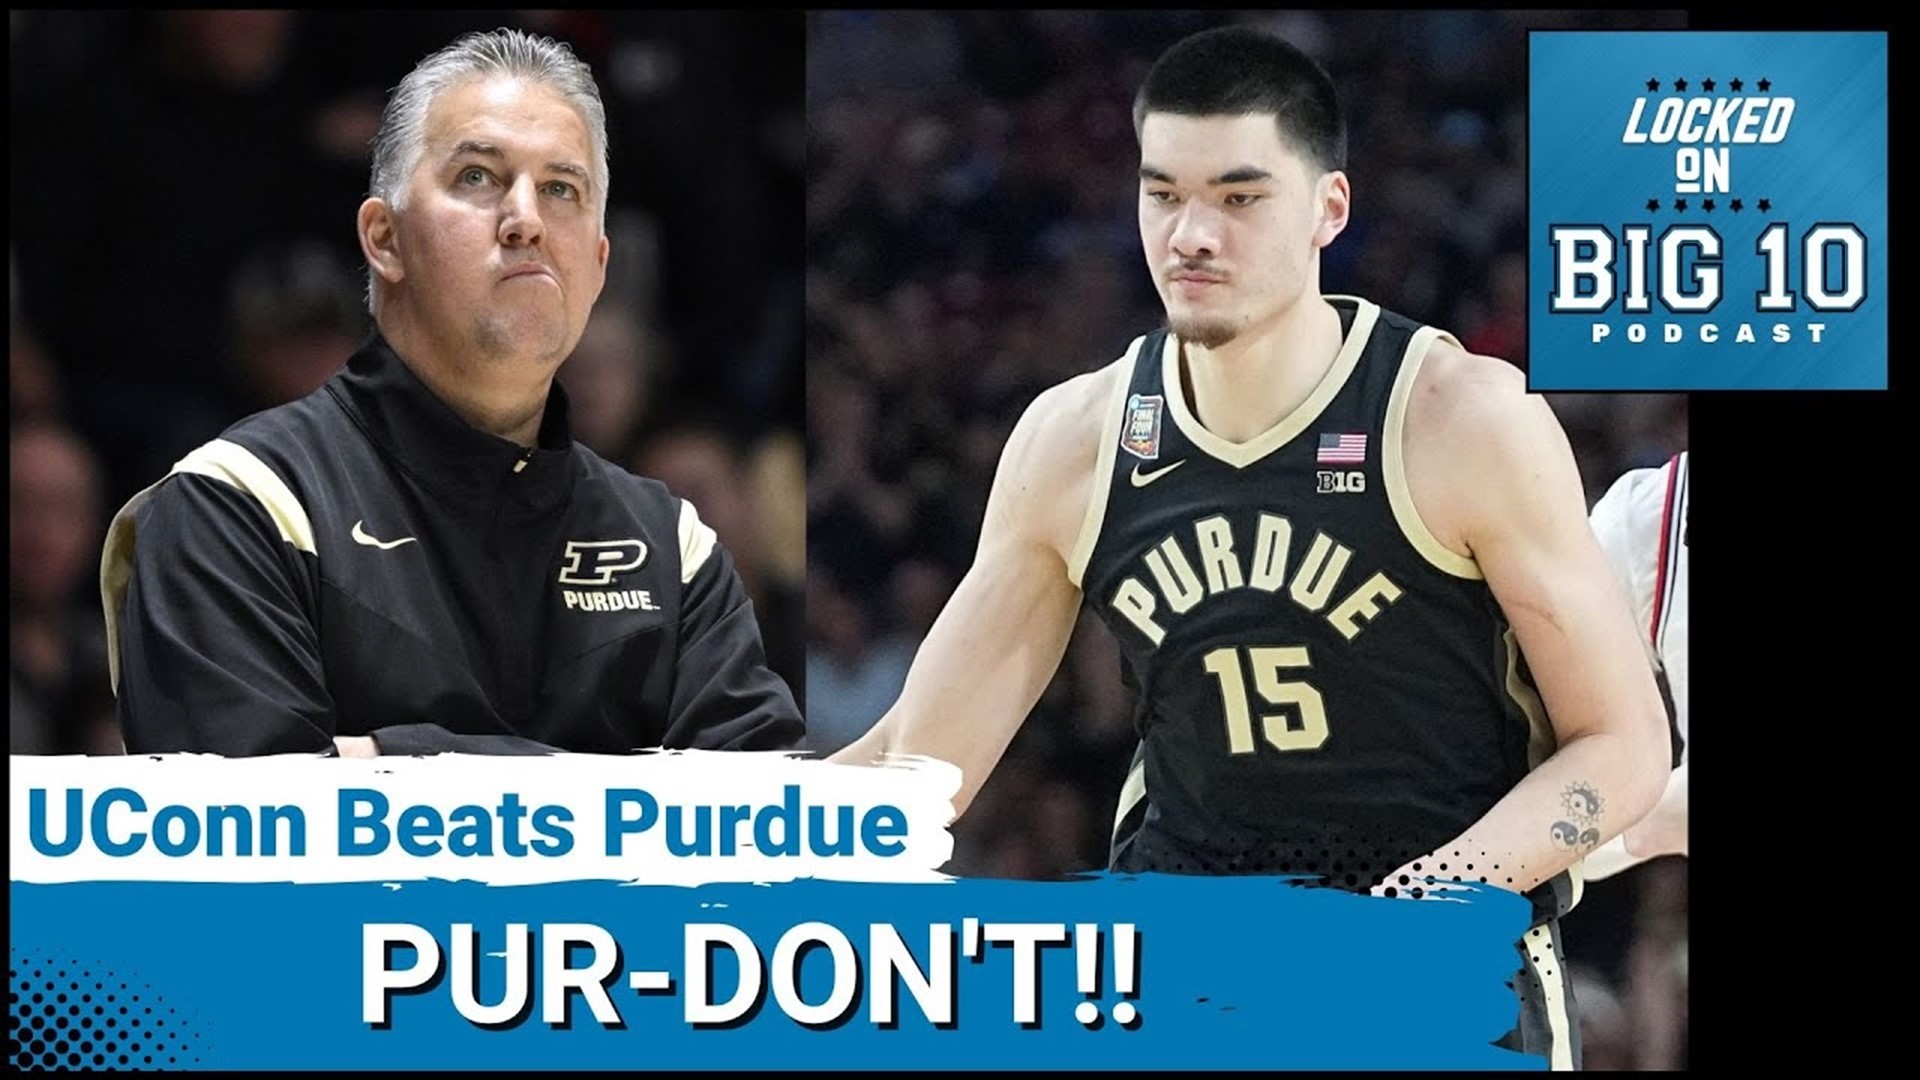 Purdue lost the NCAA Men's College Basketball Championship to UConn Monday night by a score of 75-60.  Zach Edey scored 37 points in his final game as a Boilermaker.